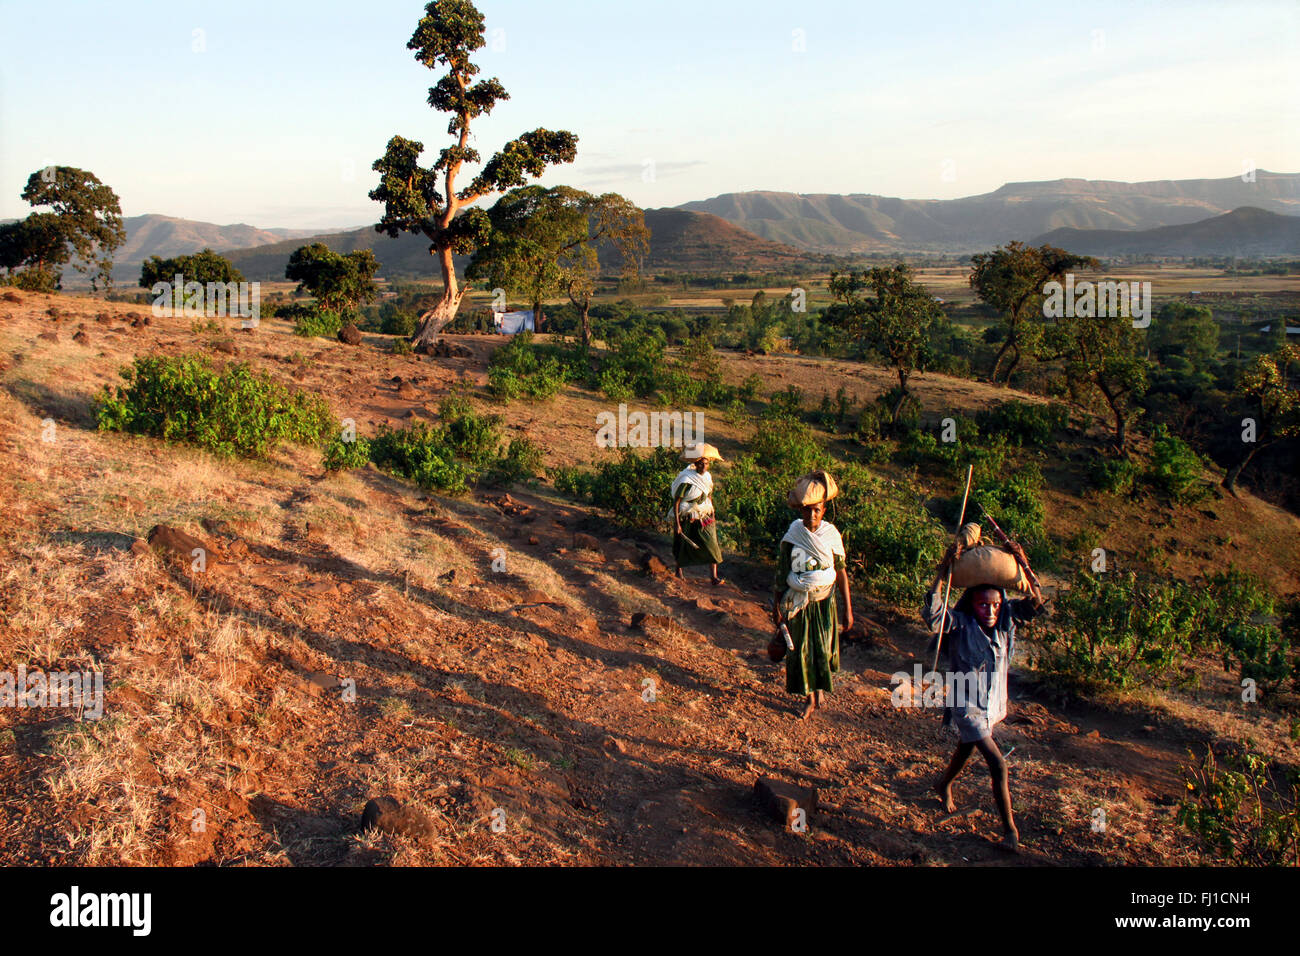 People walking in countryside near lalibela - typical landscape / naturein the North of Ethiopia Stock Photo